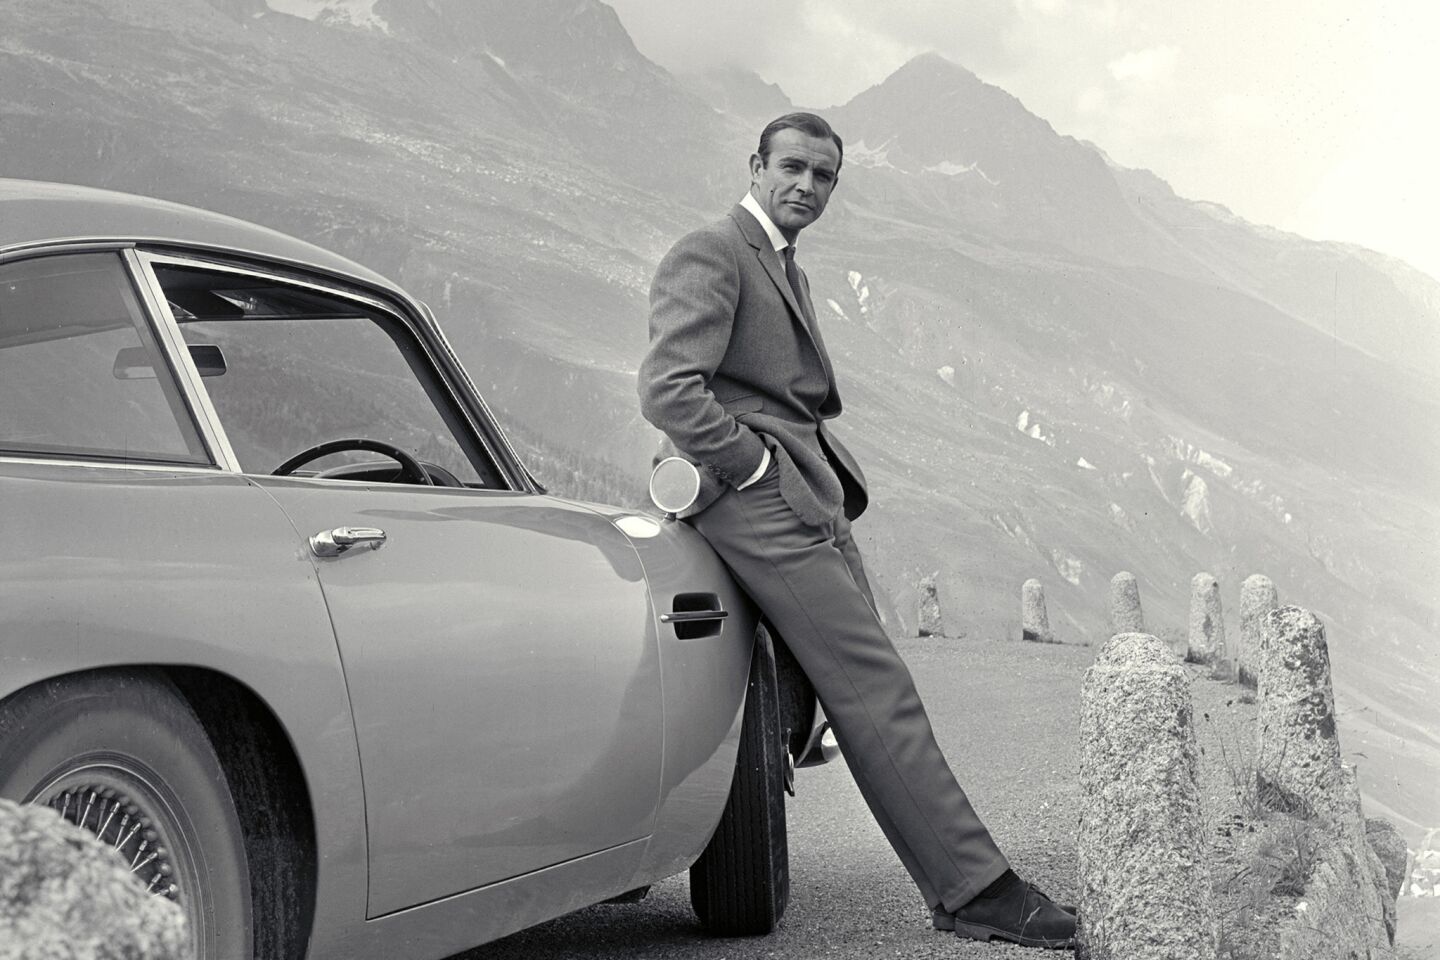 Sean Connery poses with an Aston Martin in the 1964 movie "Goldfinger."